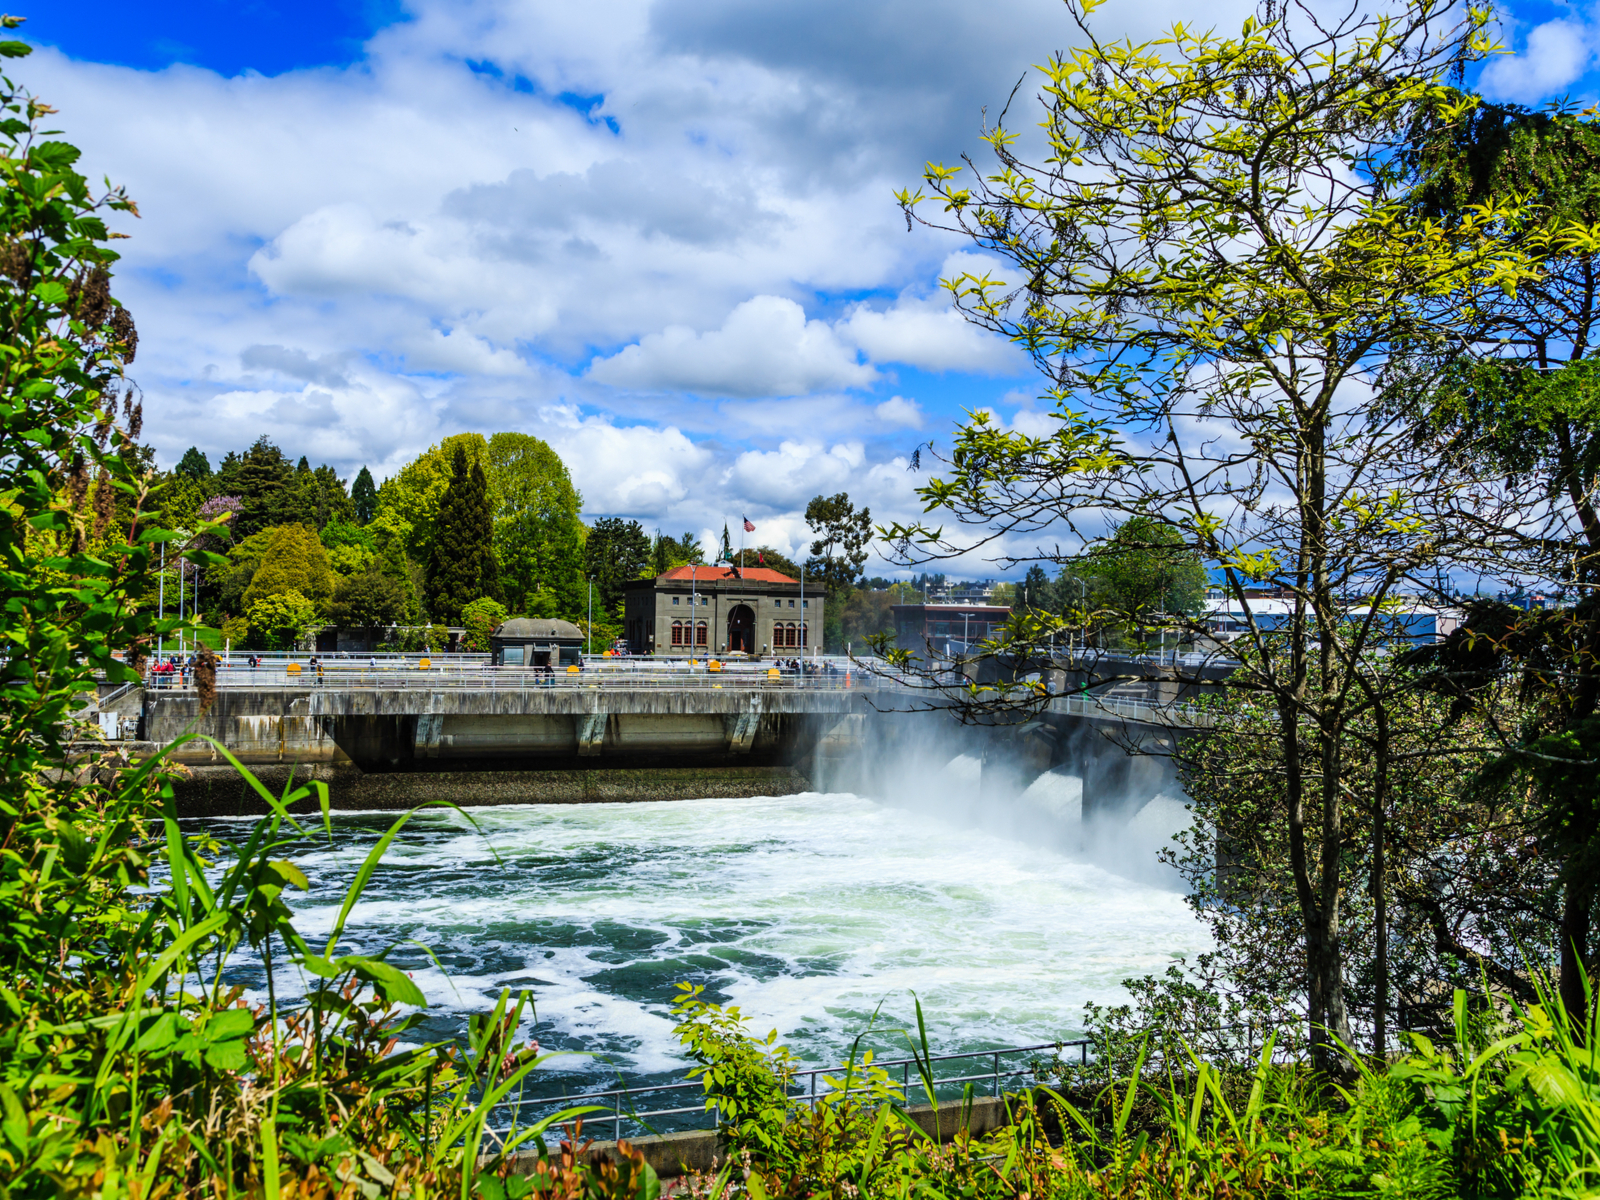 Ballard locks as viewed through trees, a top pick for the best things to see in Seattle